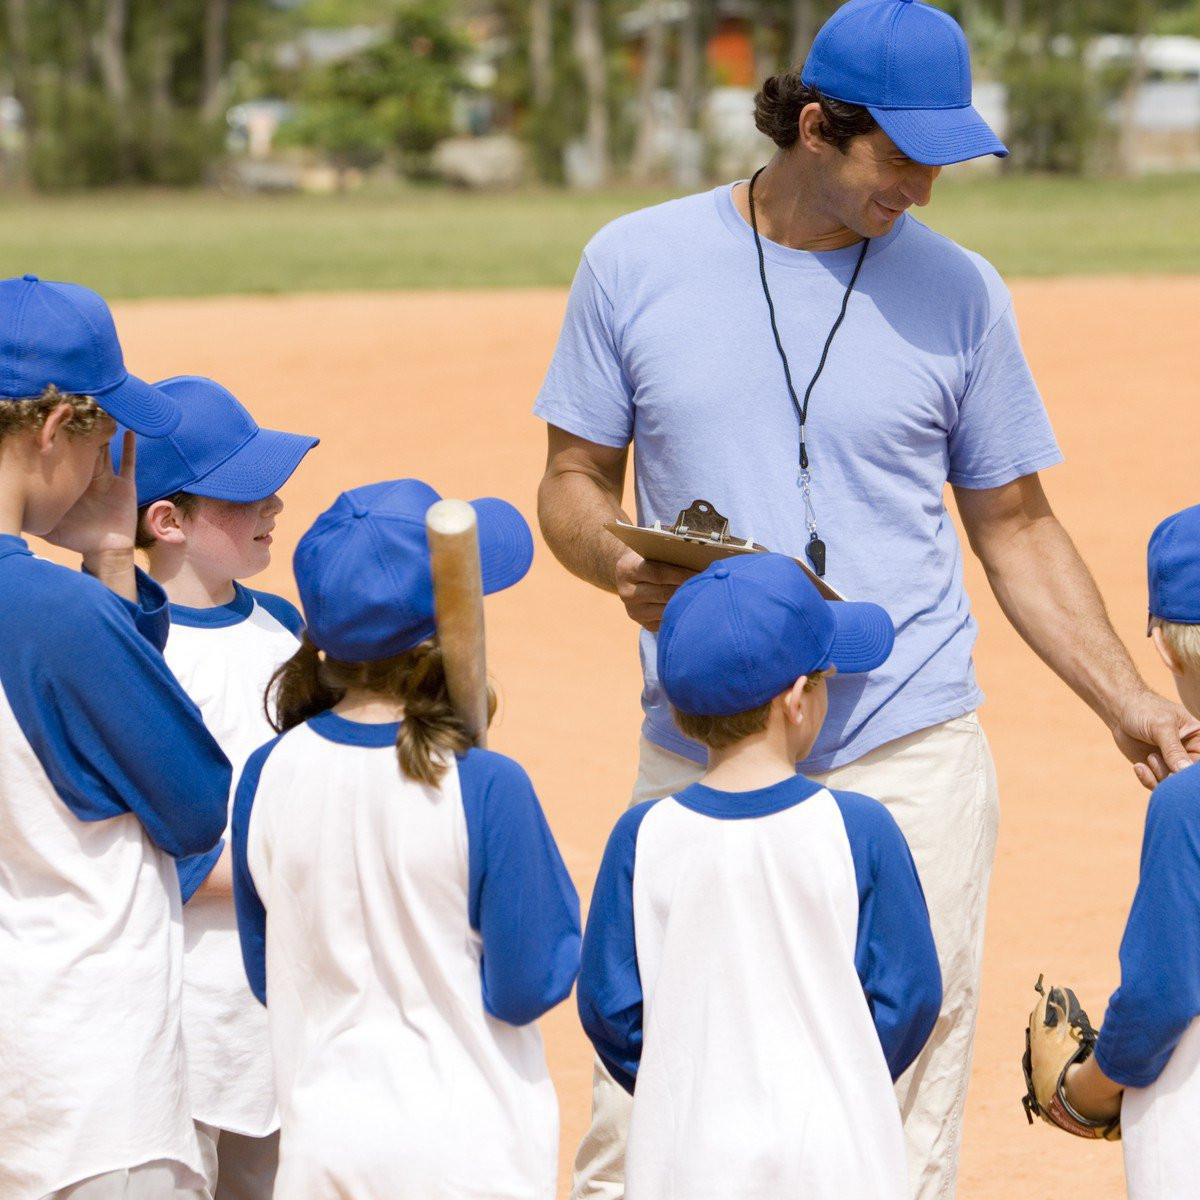 Keys to Successful Youth Baseball Practice Plans